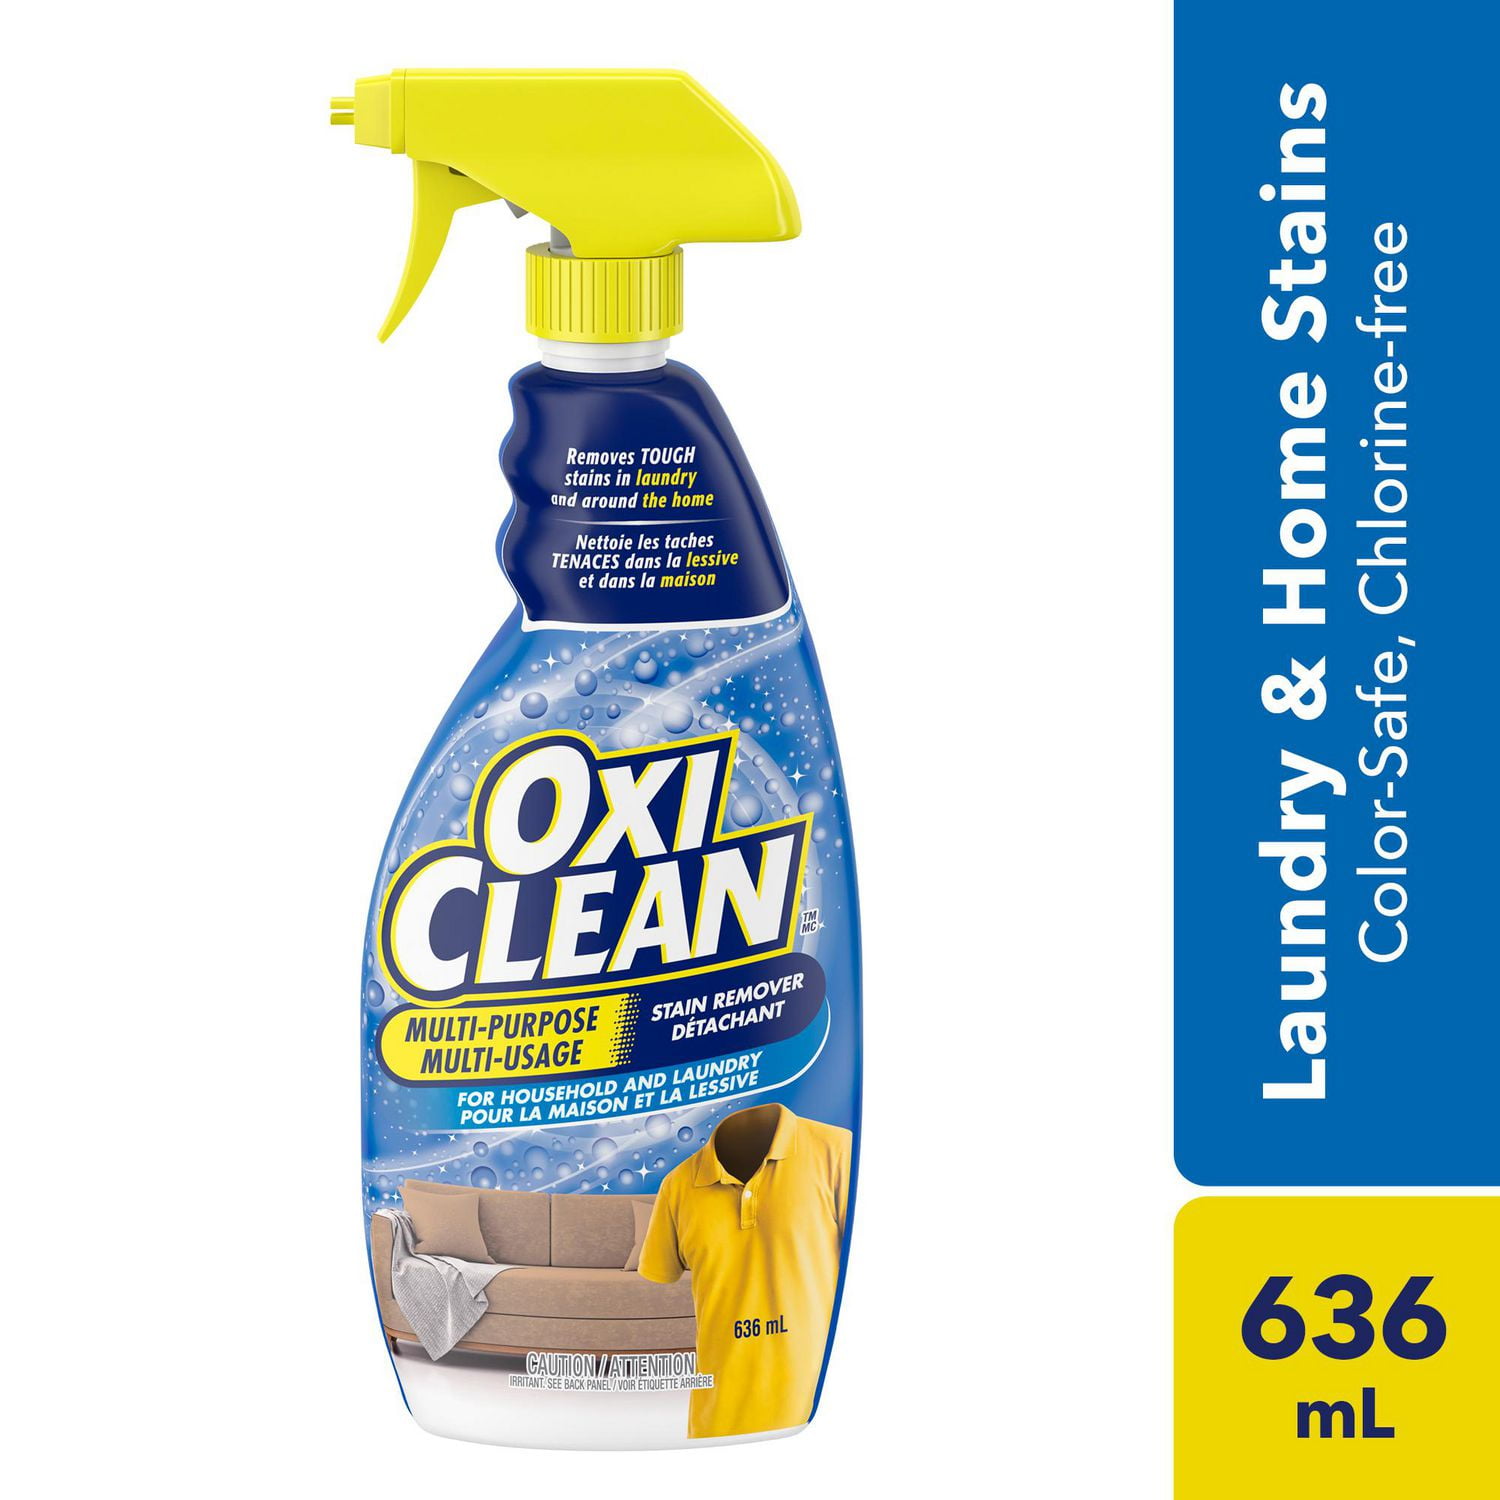 How to Remove Blood Stains with OxiClean™ 